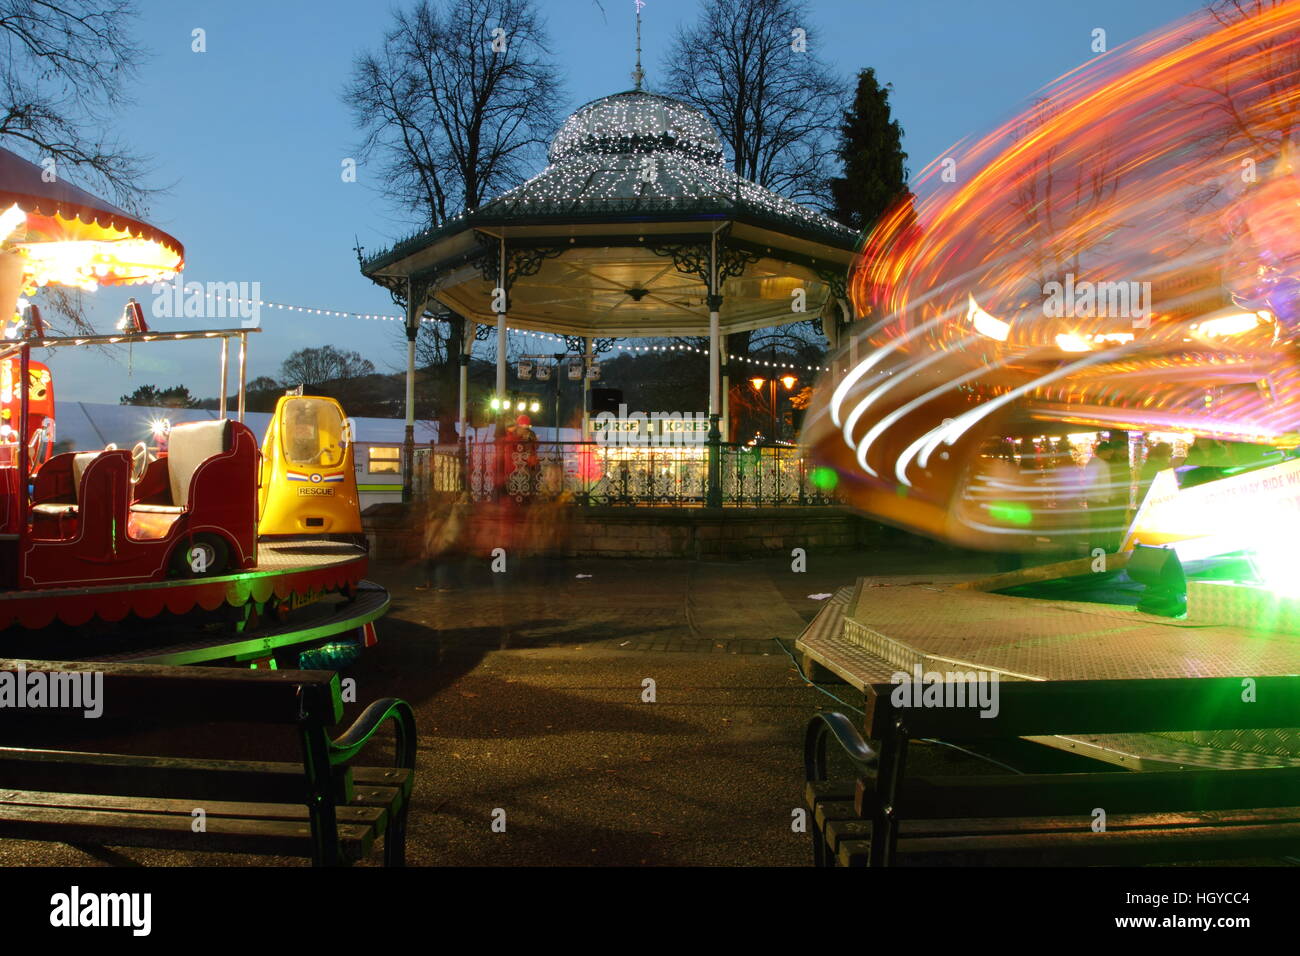 Funfair rides by the decorated bandstand in Hall Leys Park in Matlock a pretty Derbyshire market town, England UK - December Stock Photo